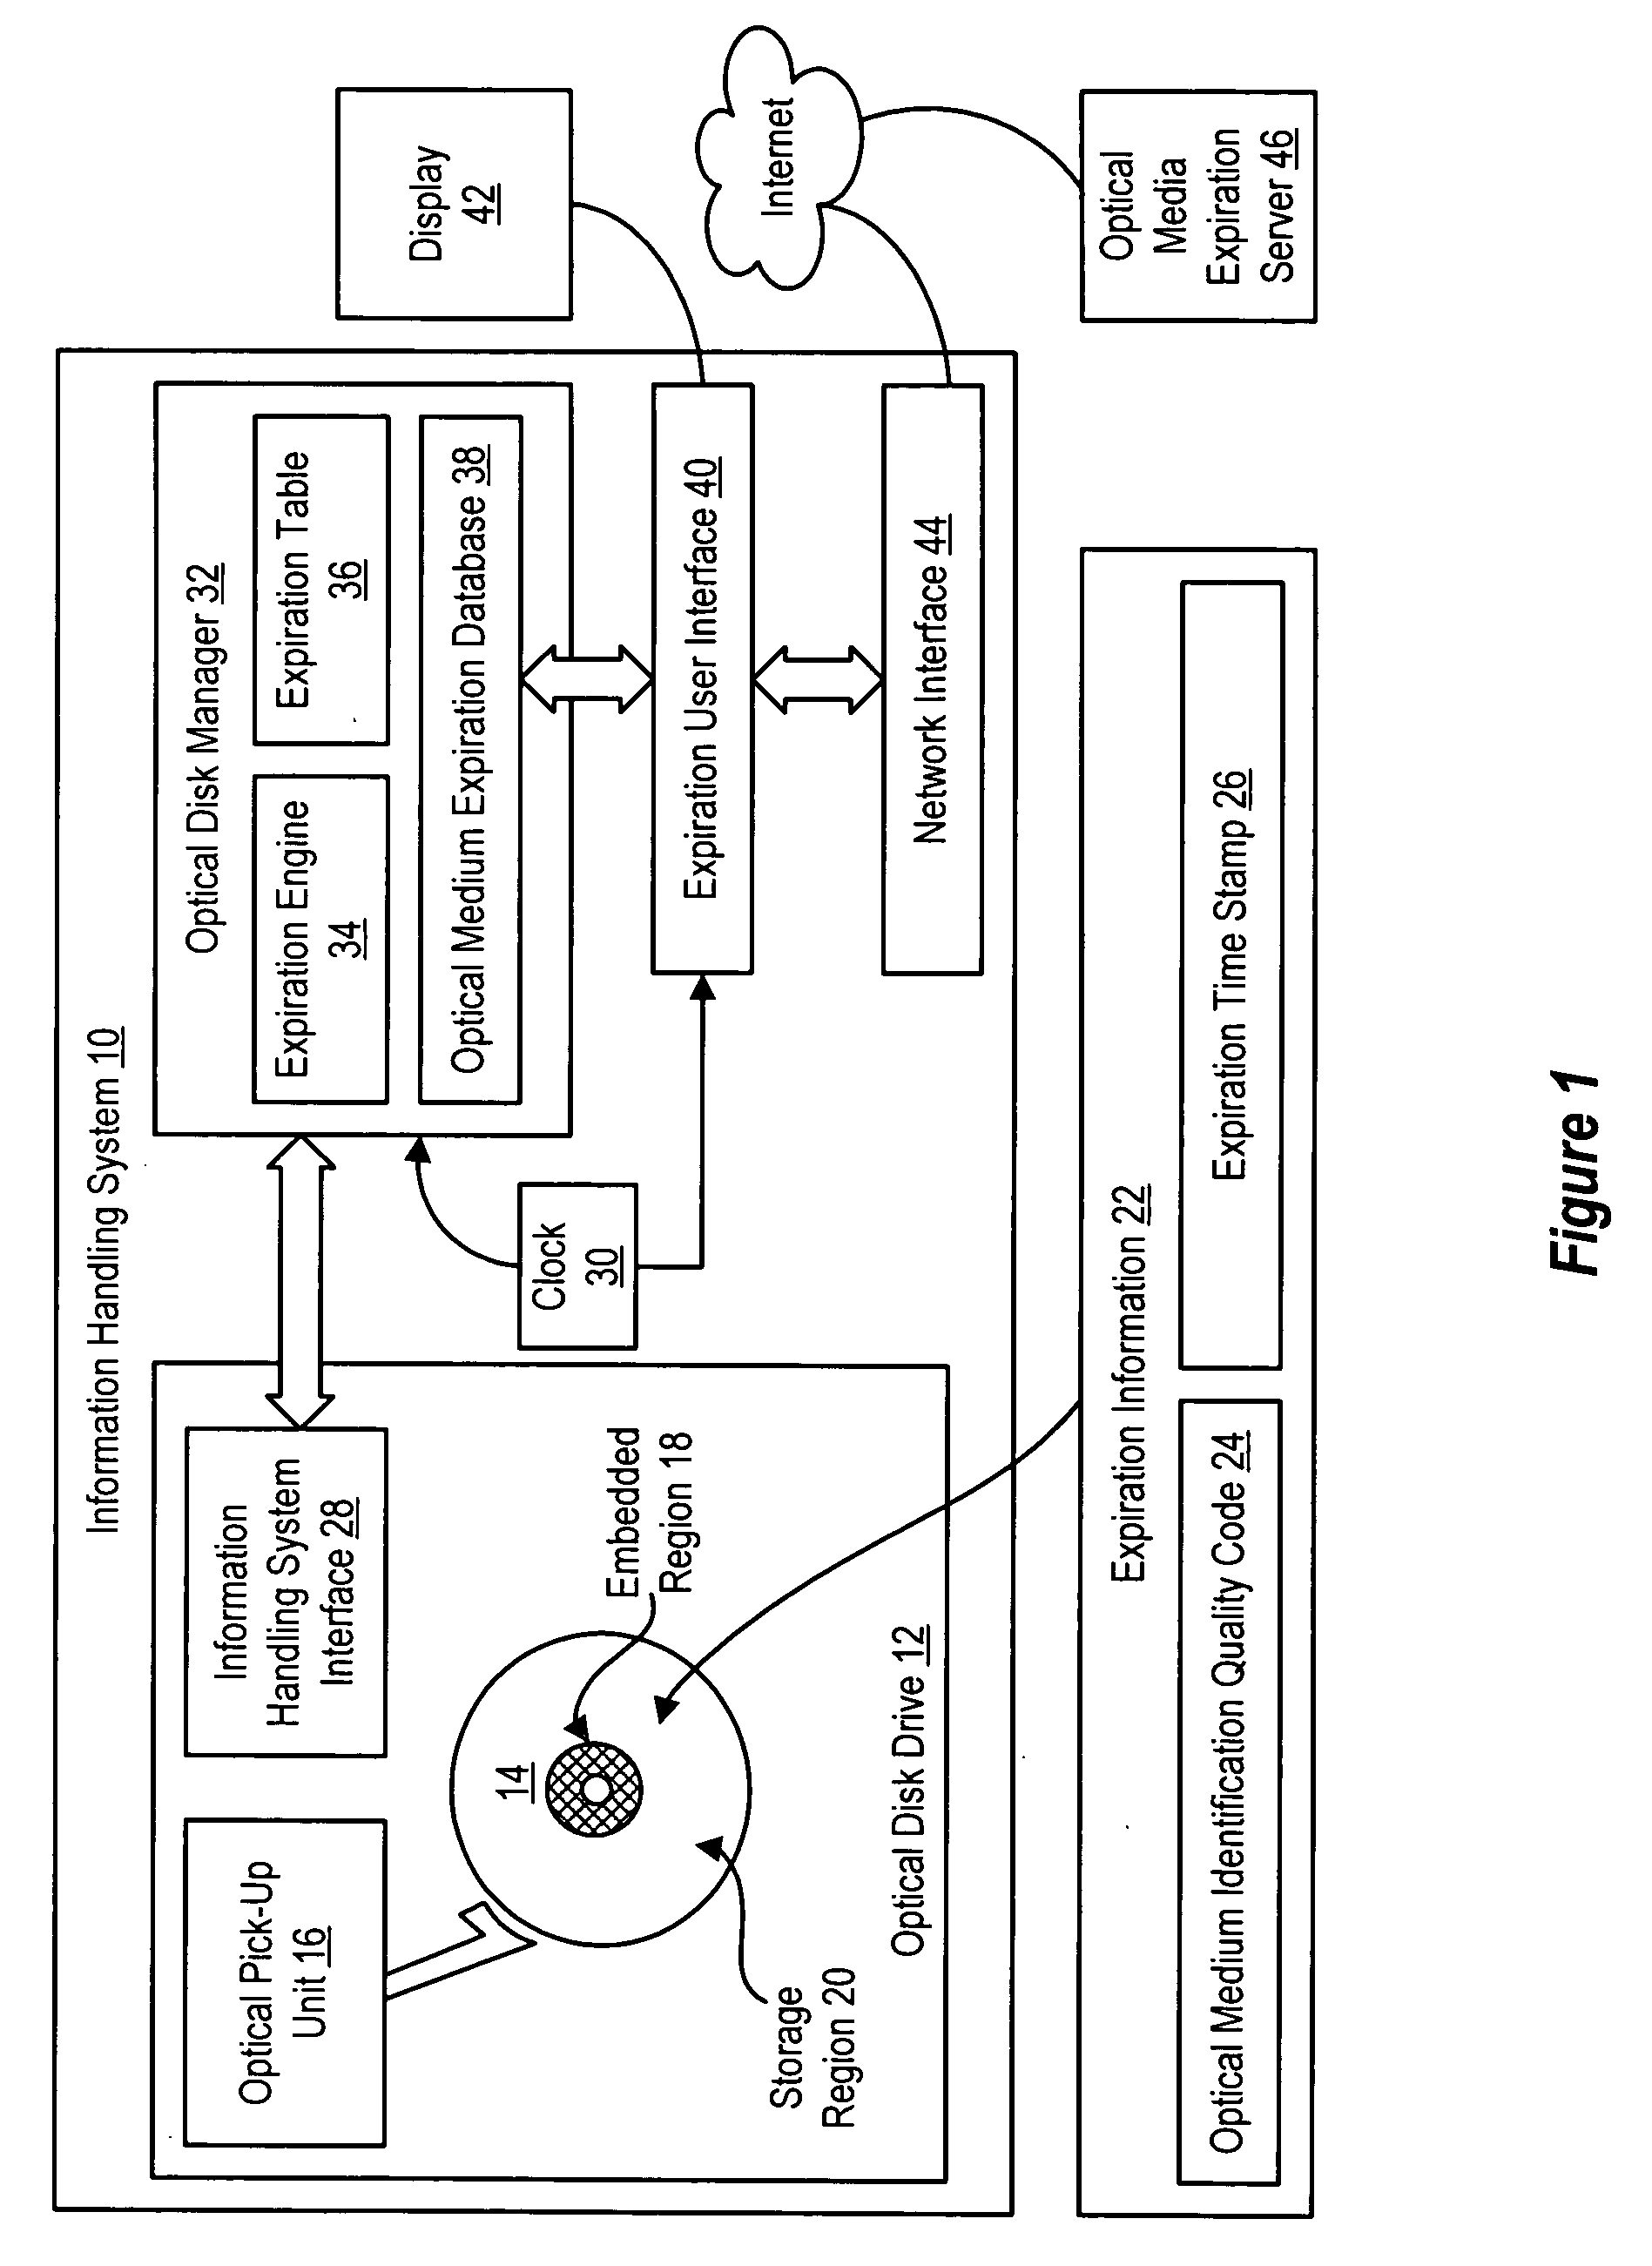 System and method for optical media information storage life tracking